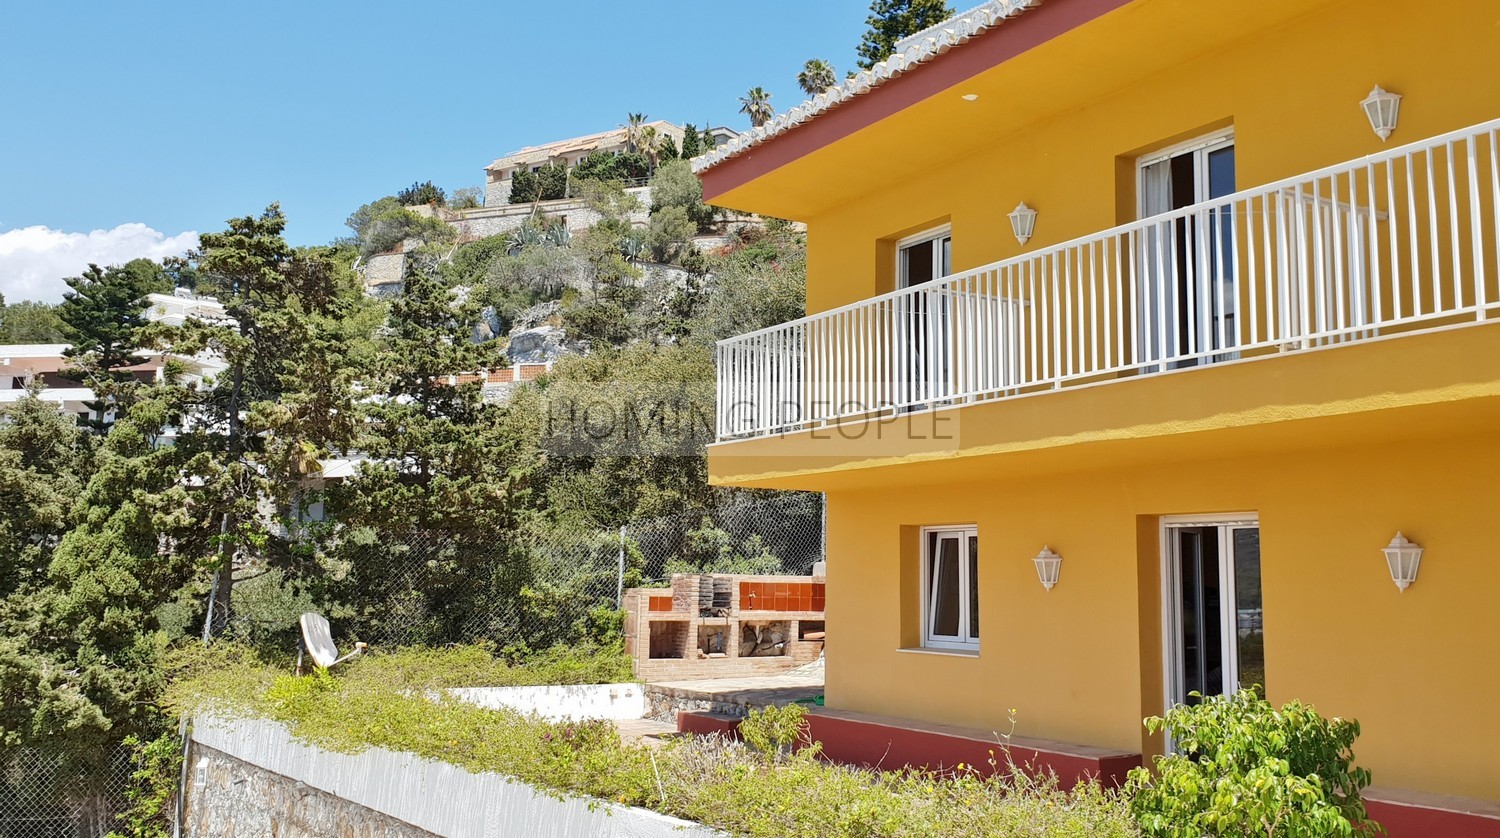 [RENTED OUT]: Villa on a cliff, facing the bay... and walking distance to town. Peace and quiet guaranteed!